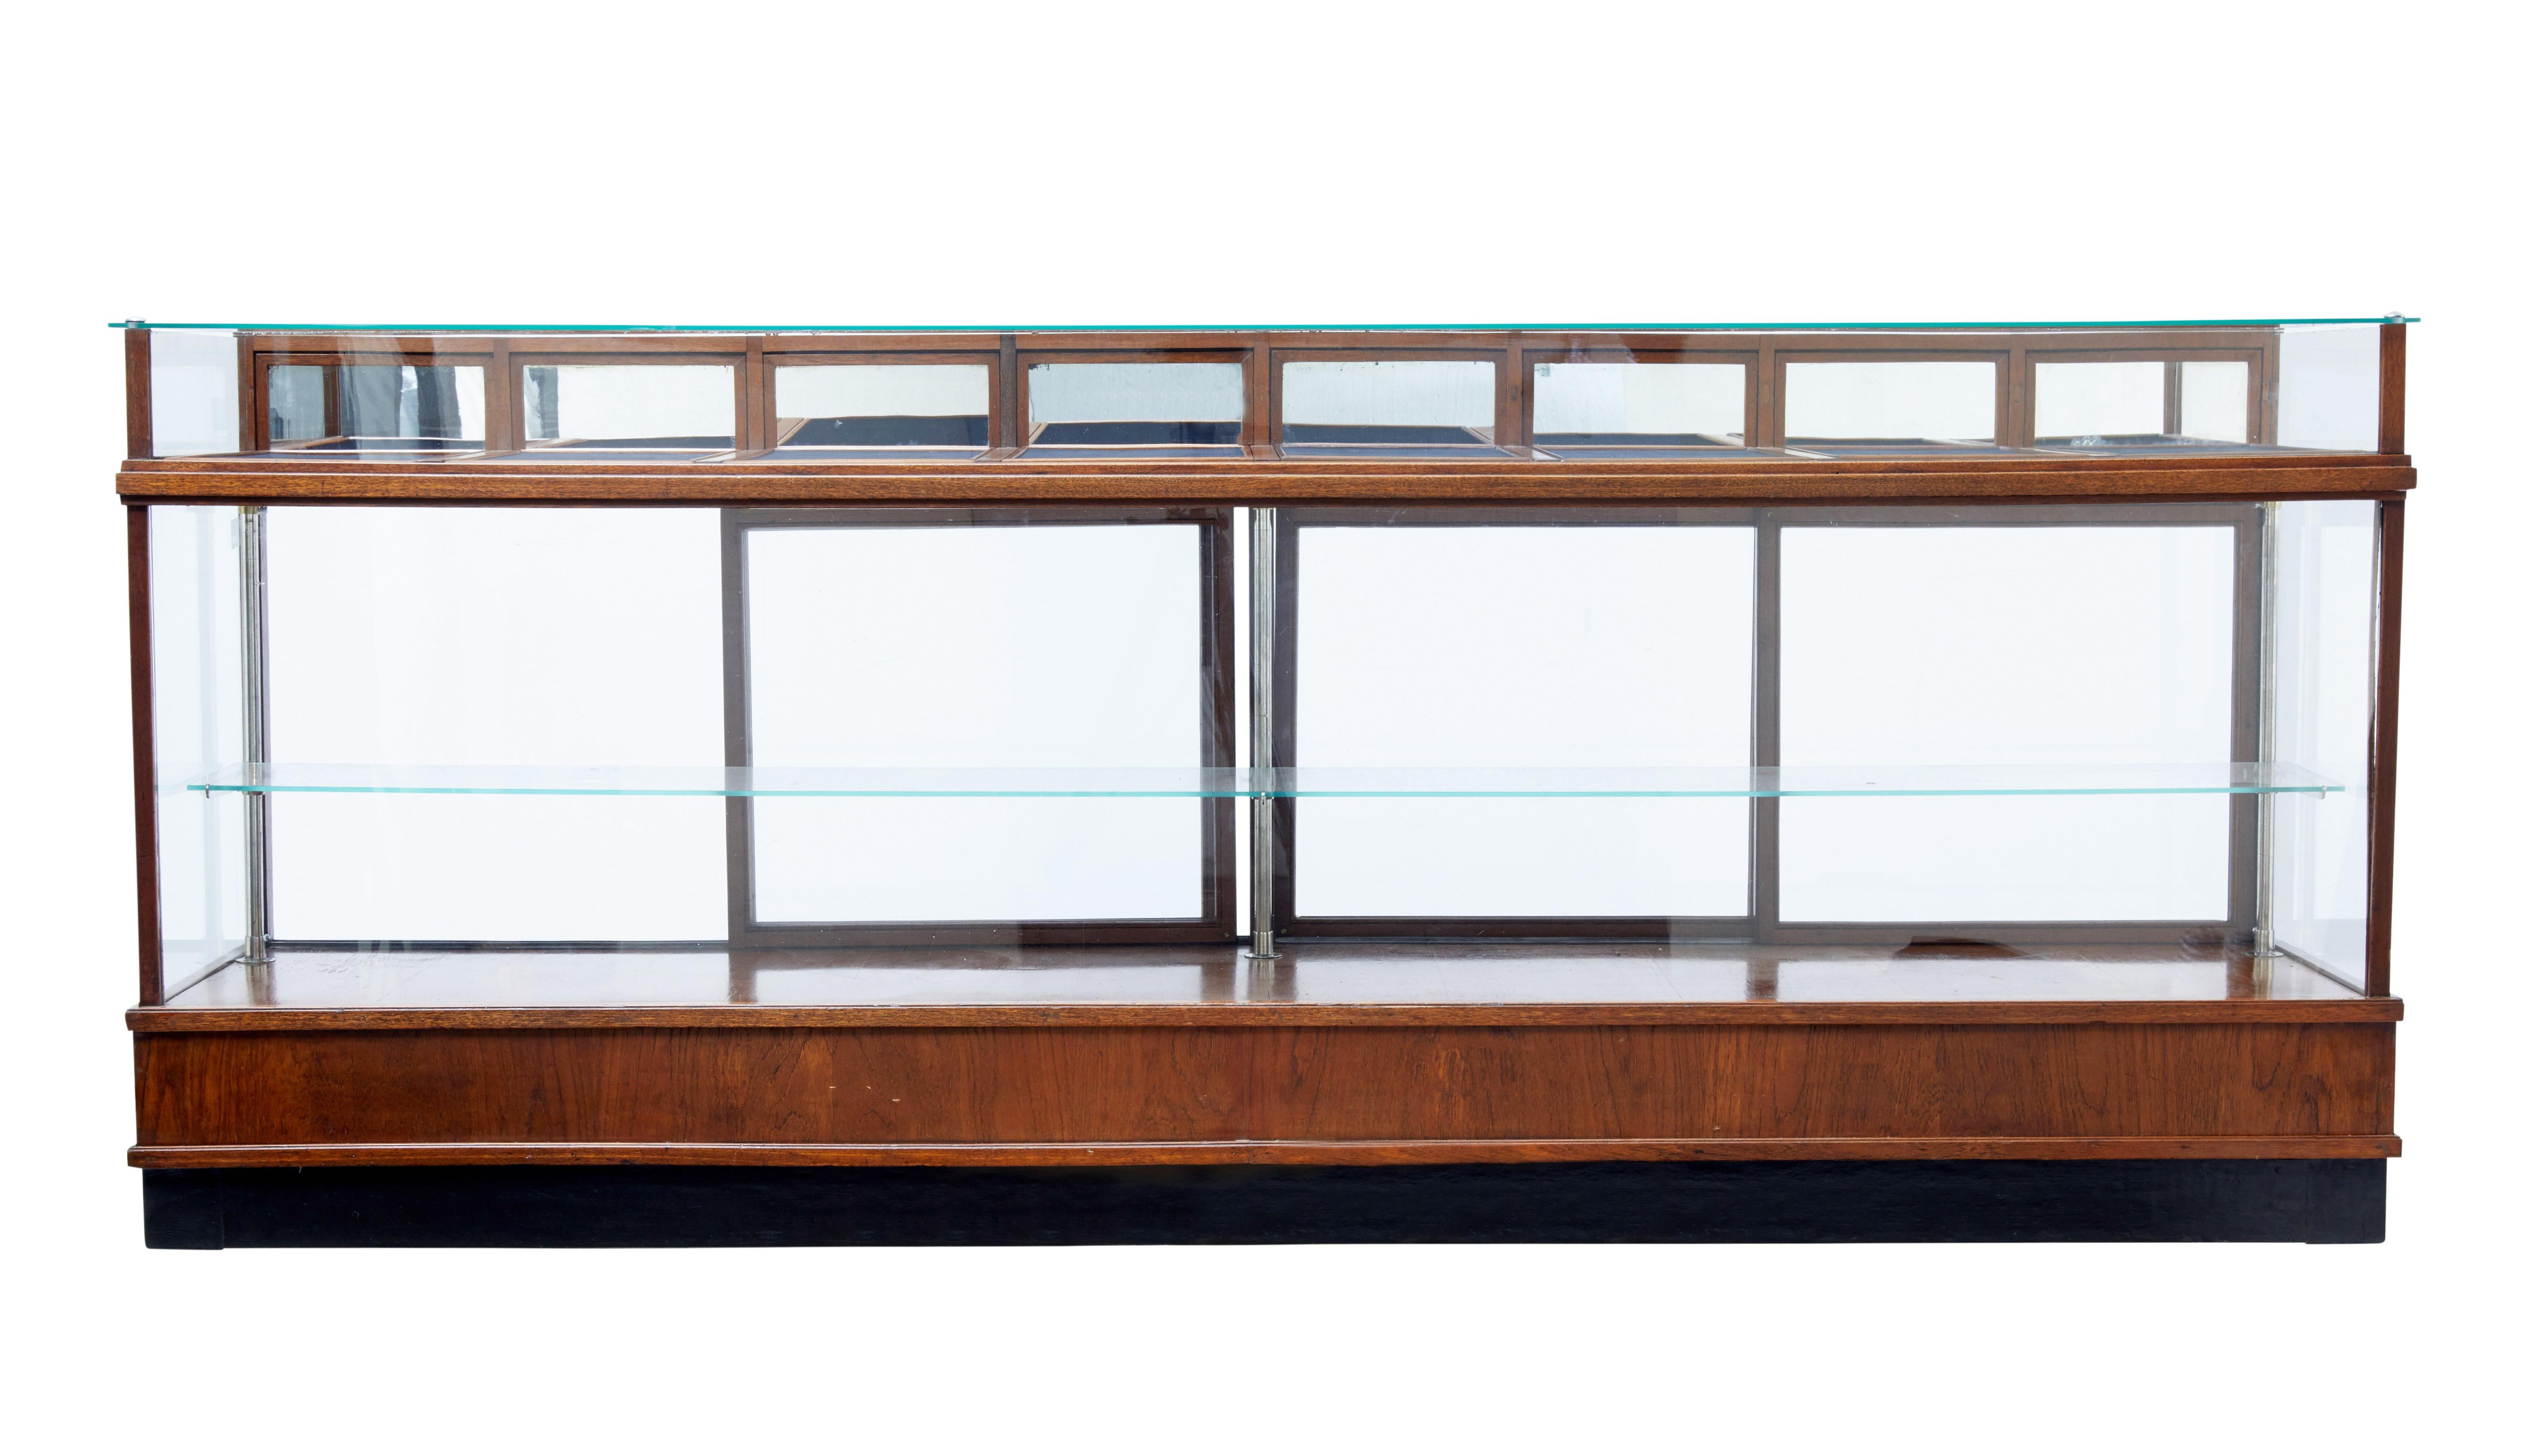 Large impressive haberdashery shop display, circa 1930.

Glazed front, sides and top. Presented in a teak frame standing on a ebonised plinth.

Single glazed shelf held in place by three chrome supports, the shelf is accessible by four-sliding